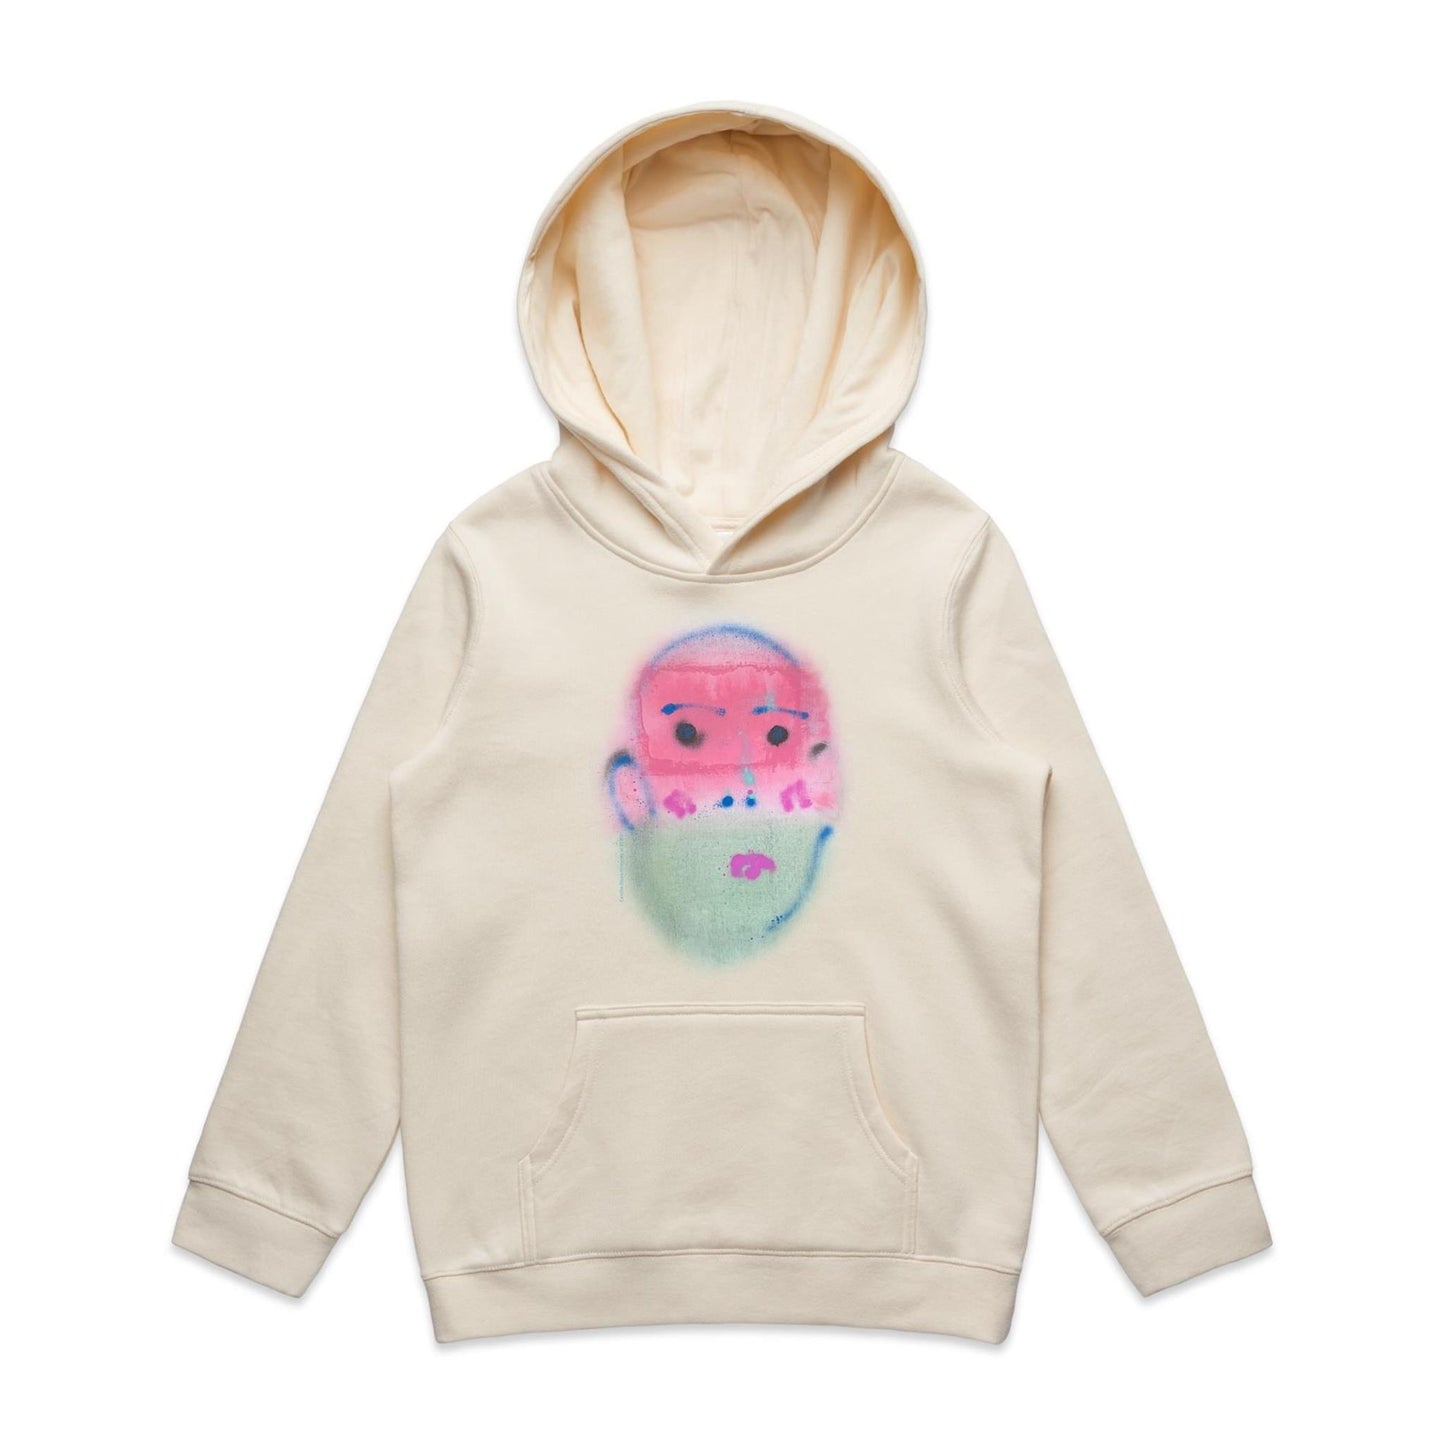 Red Green Face Hoodies for Kids